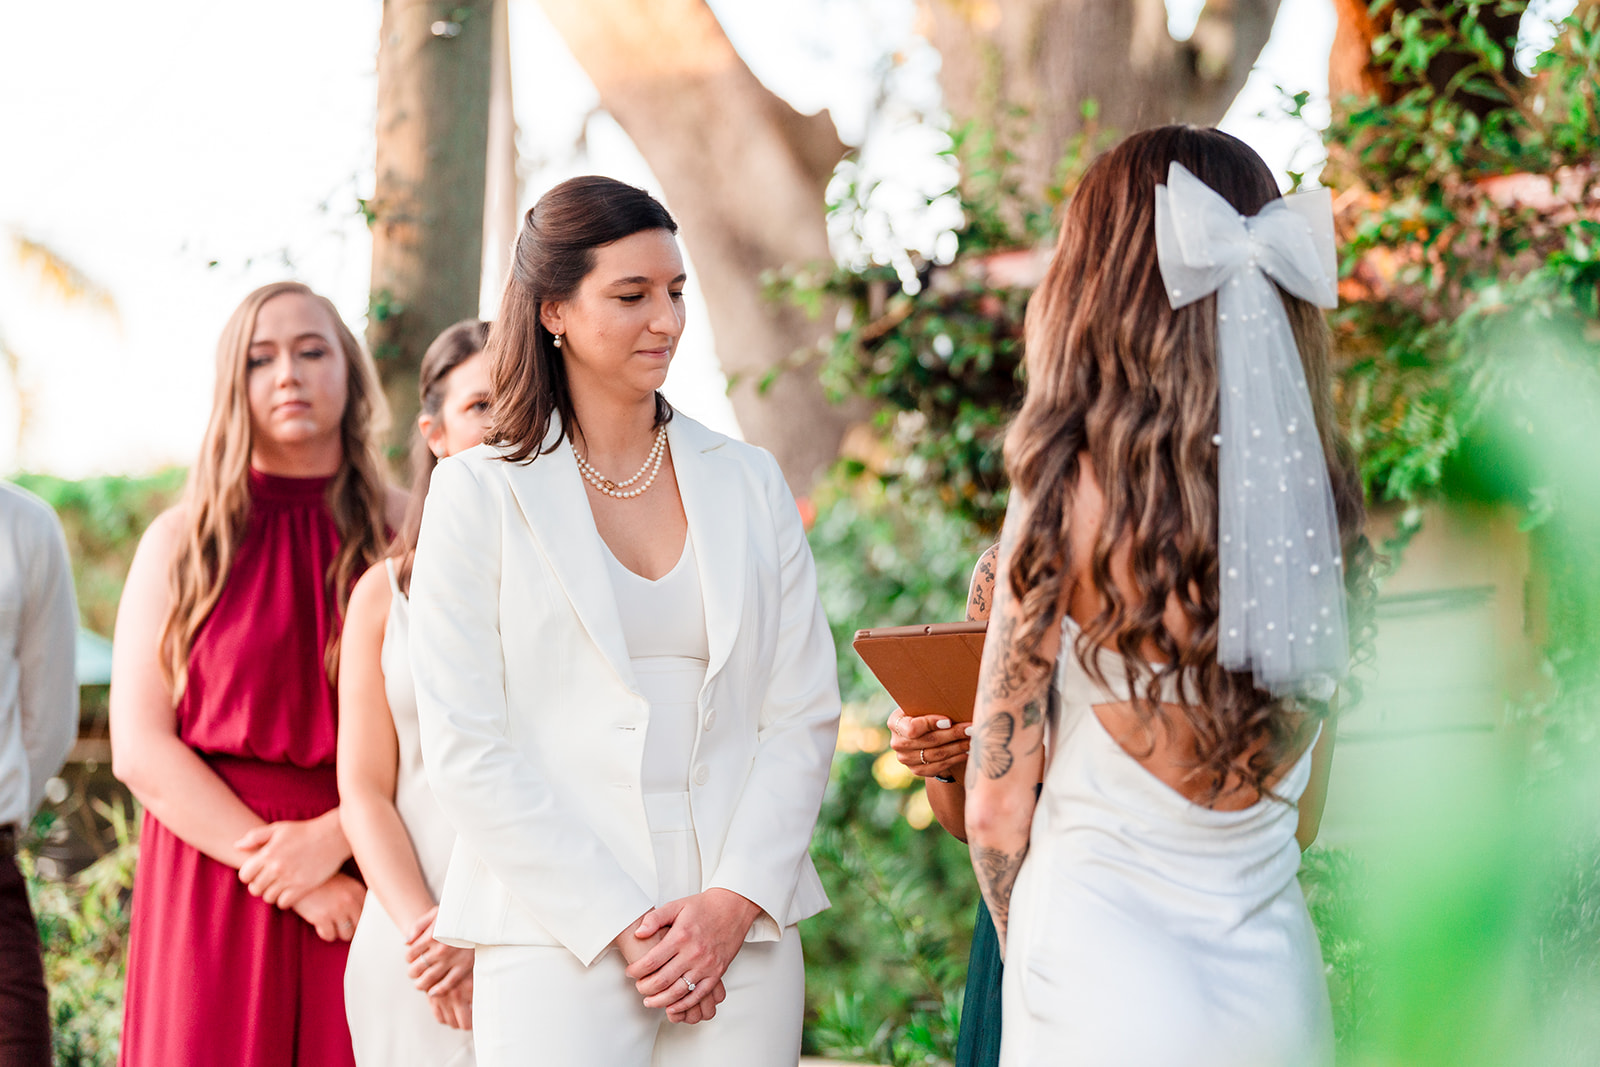 Two brides stand at the altar, exchanging vows in a heartfelt moment captured in LGBTQ wedding photography.